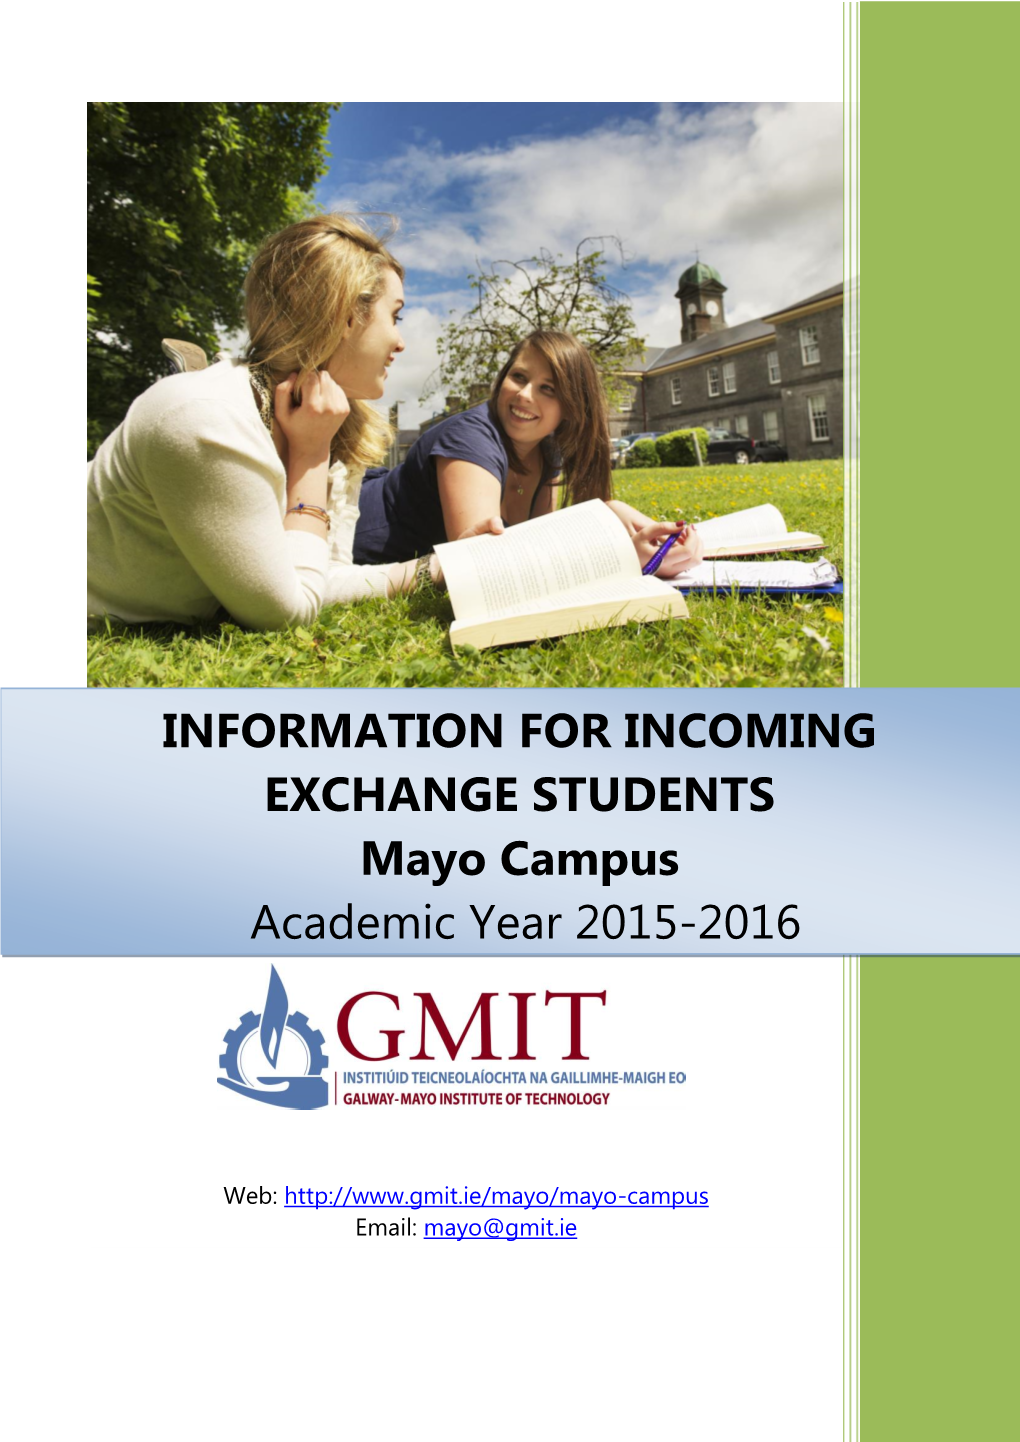 INFORMATION for INCOMING EXCHANGE STUDENTS Mayo Campus Academic Year 2015-2016